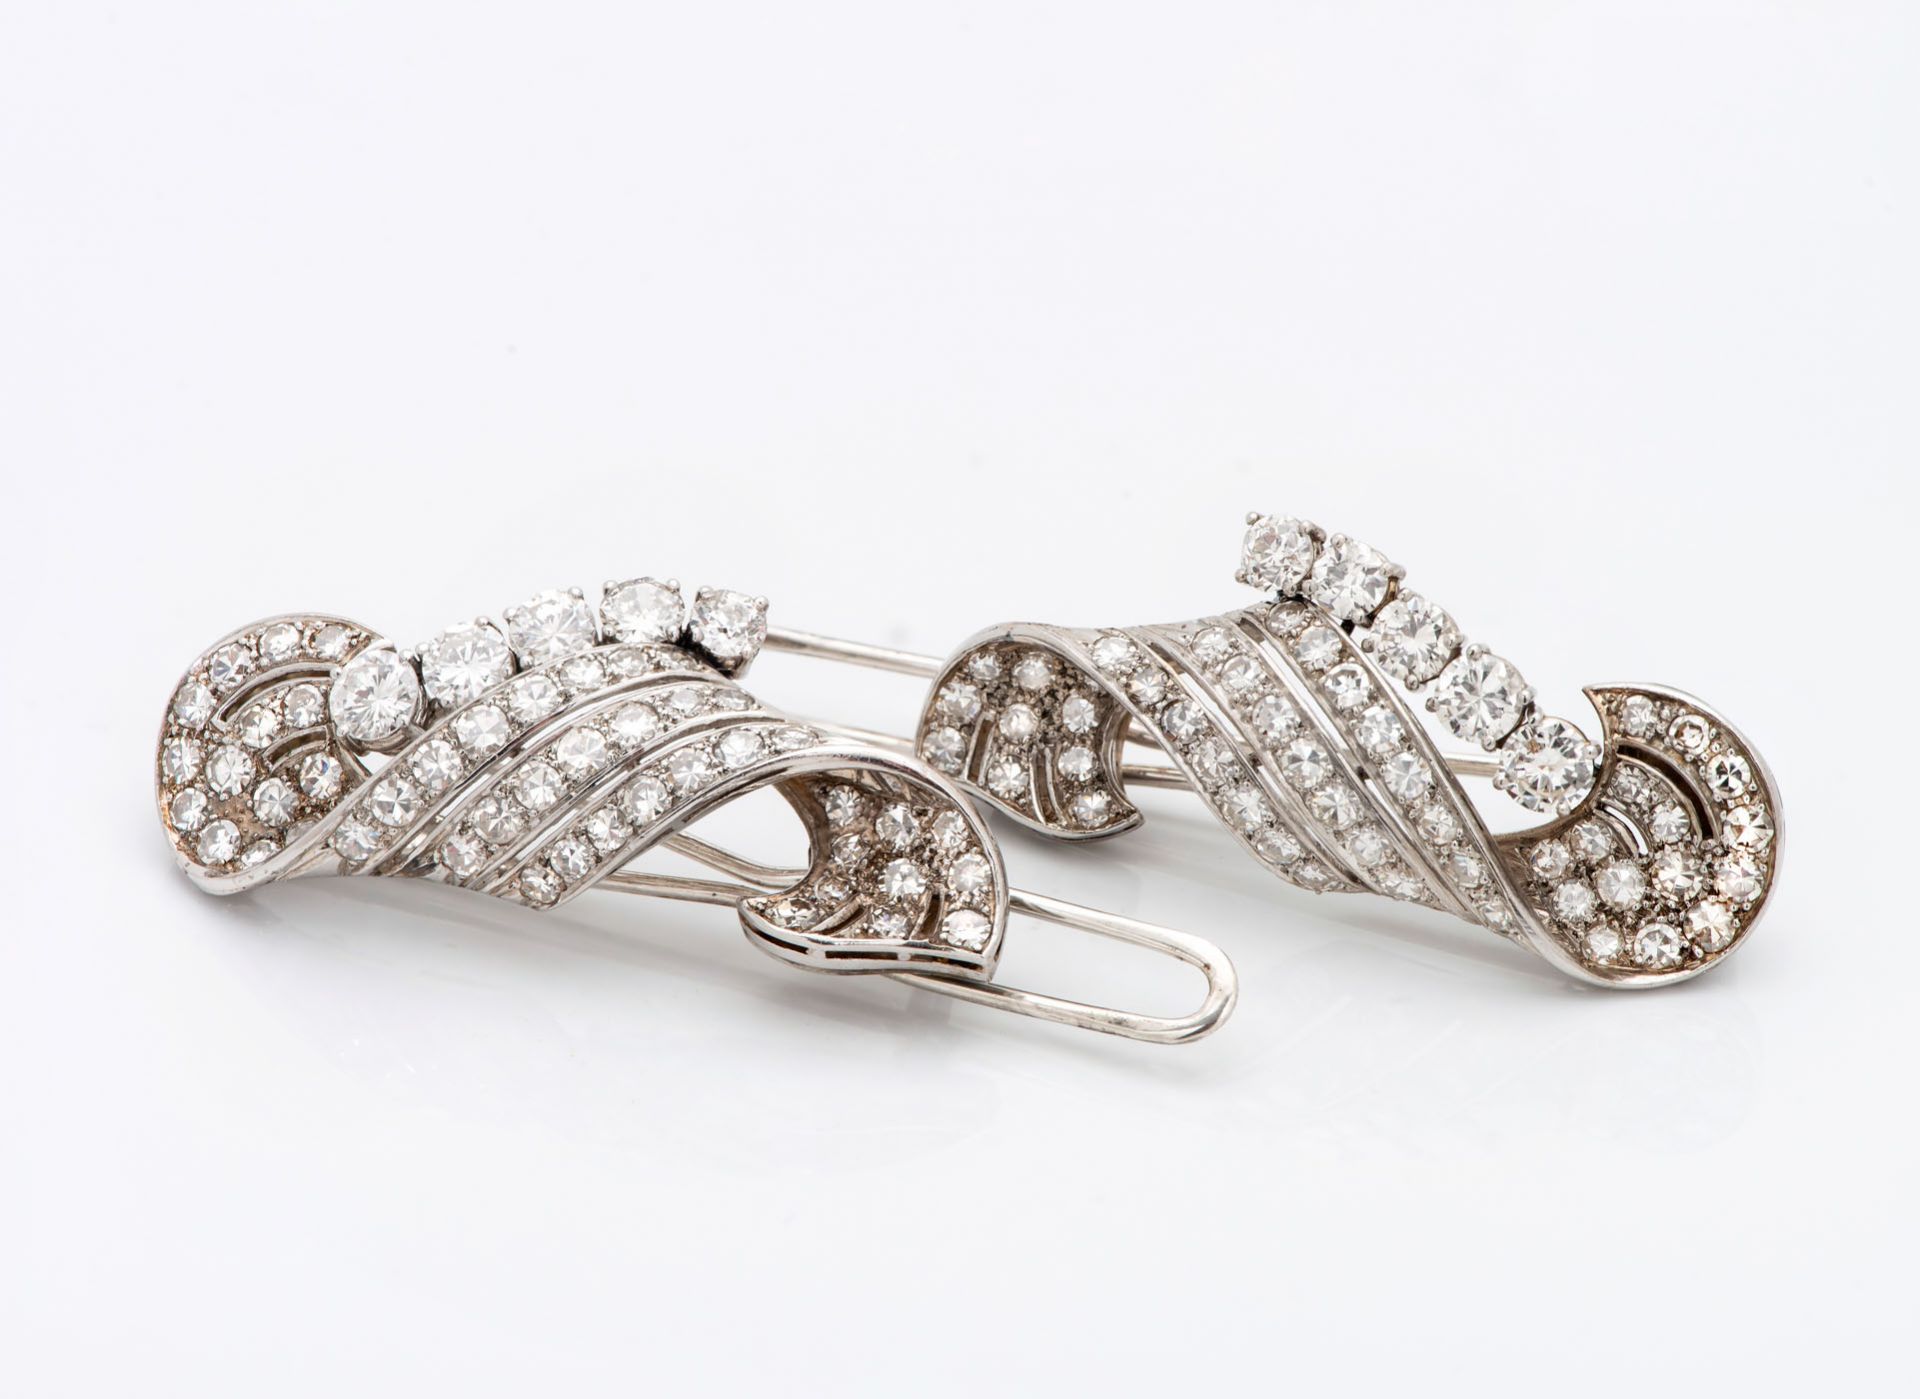 A Pair of Fine Art Deco Platinum and Diamond Hair Pins, France, Early 20th Cetnury - Image 2 of 3